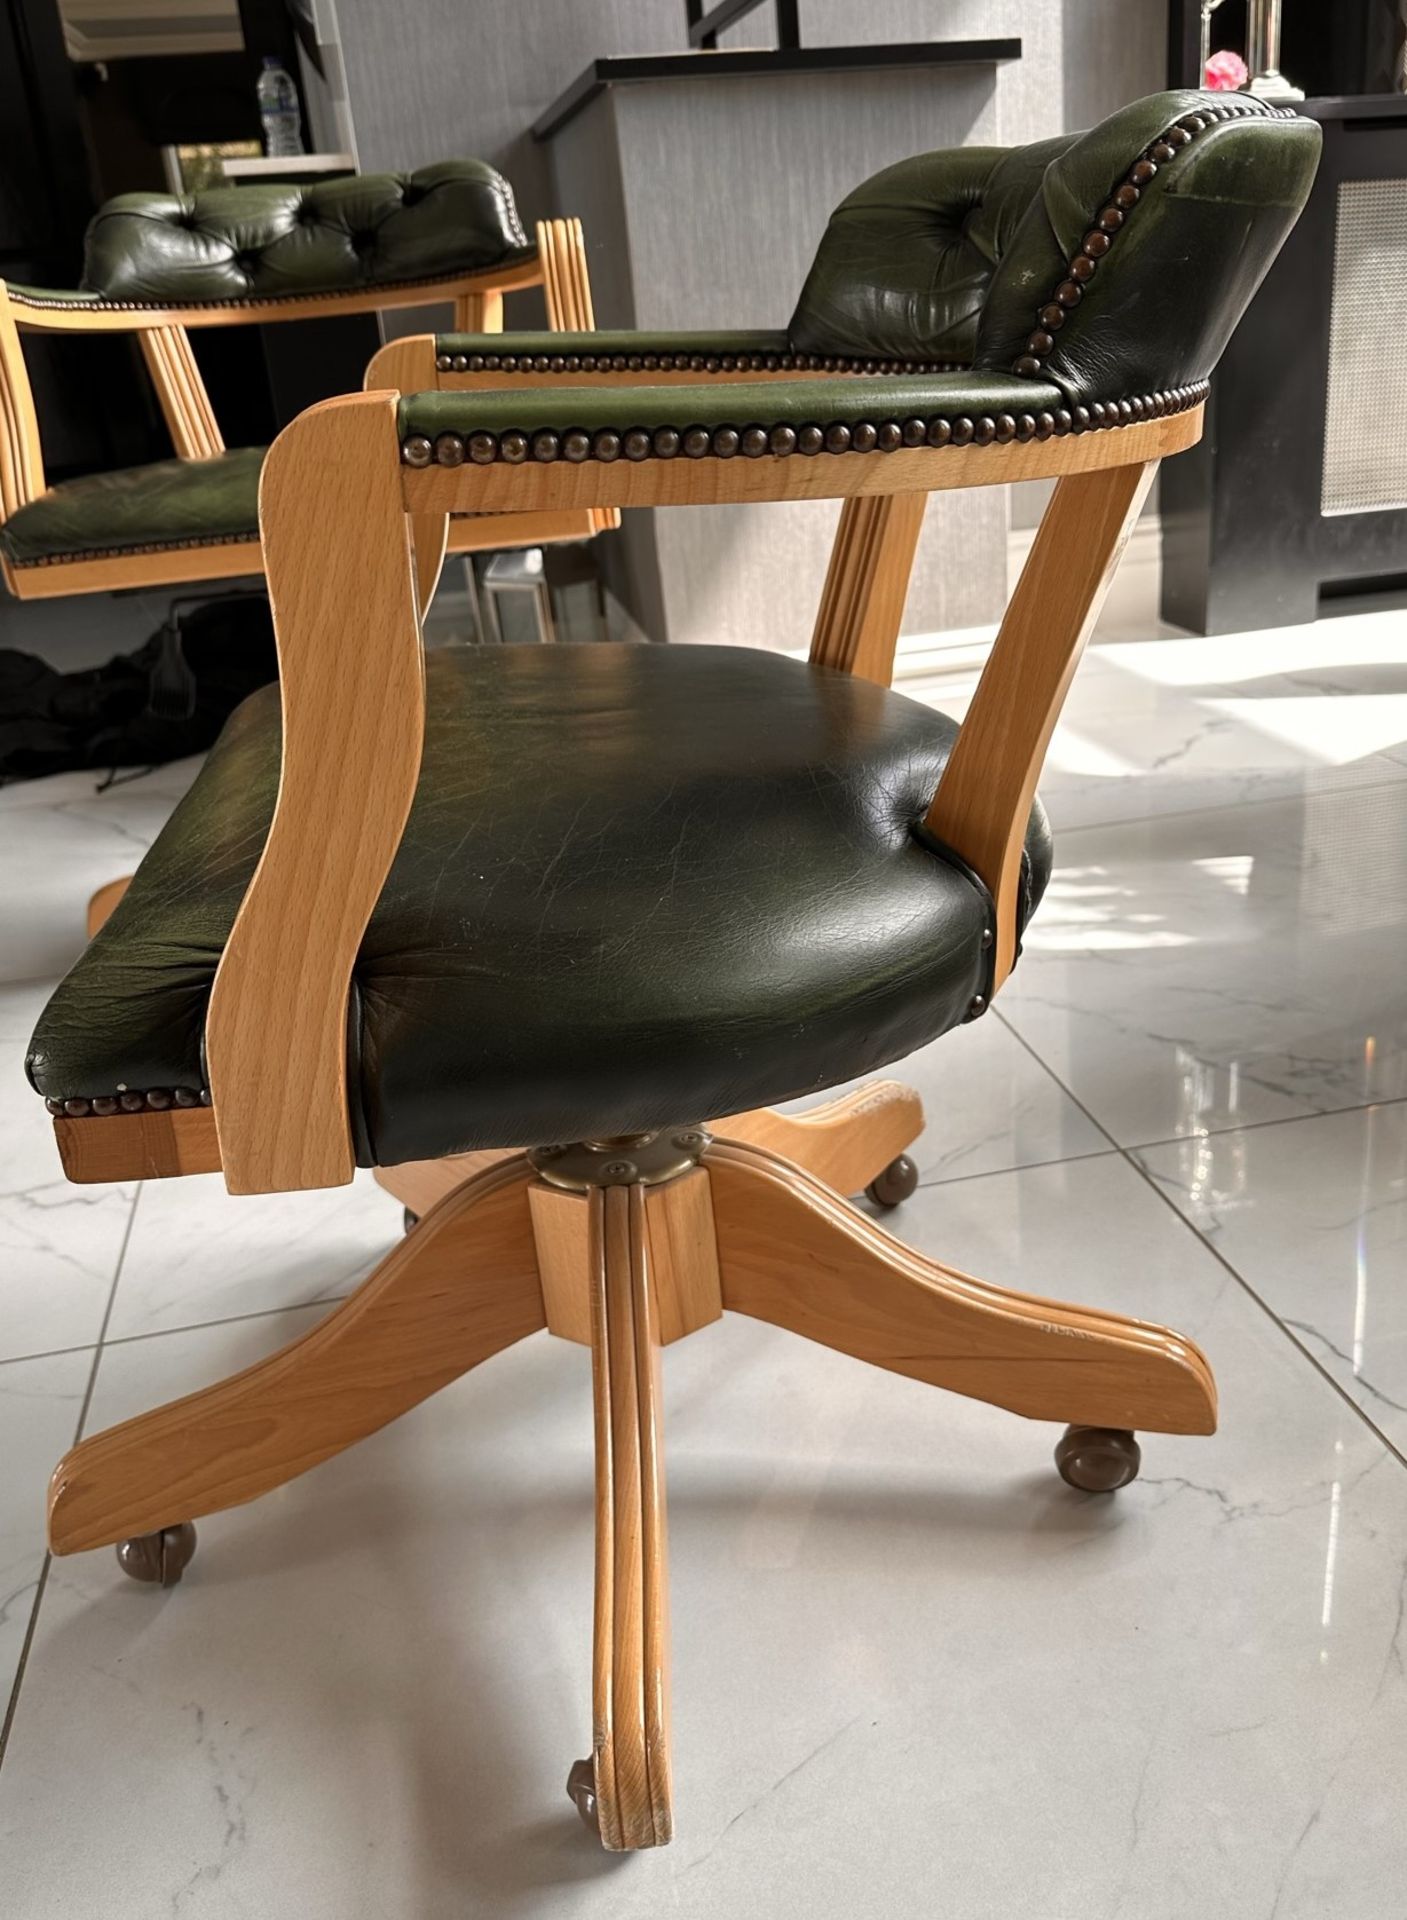 1 x VINTAGE 1970's Padded Captains Chair In Green Leather And Solid Wood Legs On Wheels - Image 2 of 4